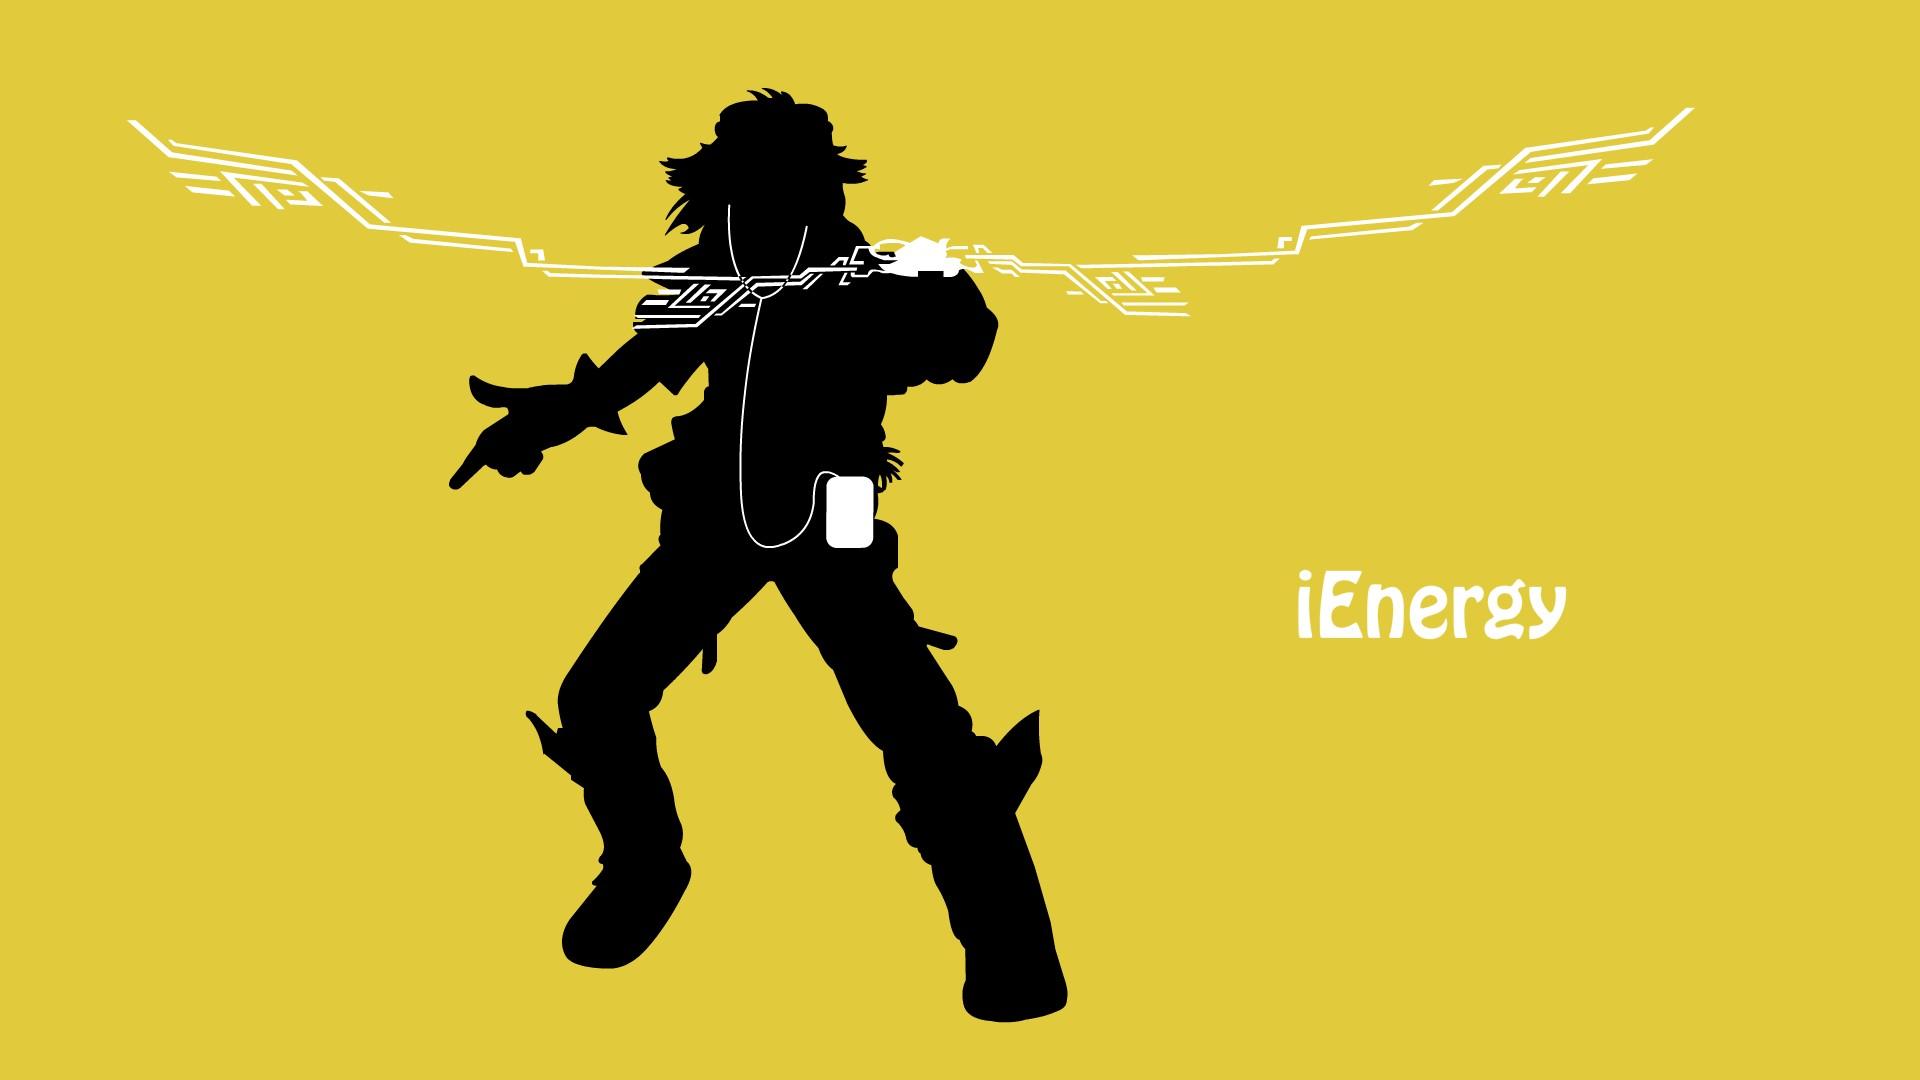 Ipod Silhouette League Of Legends Stereotype Ezreal Wallpaper